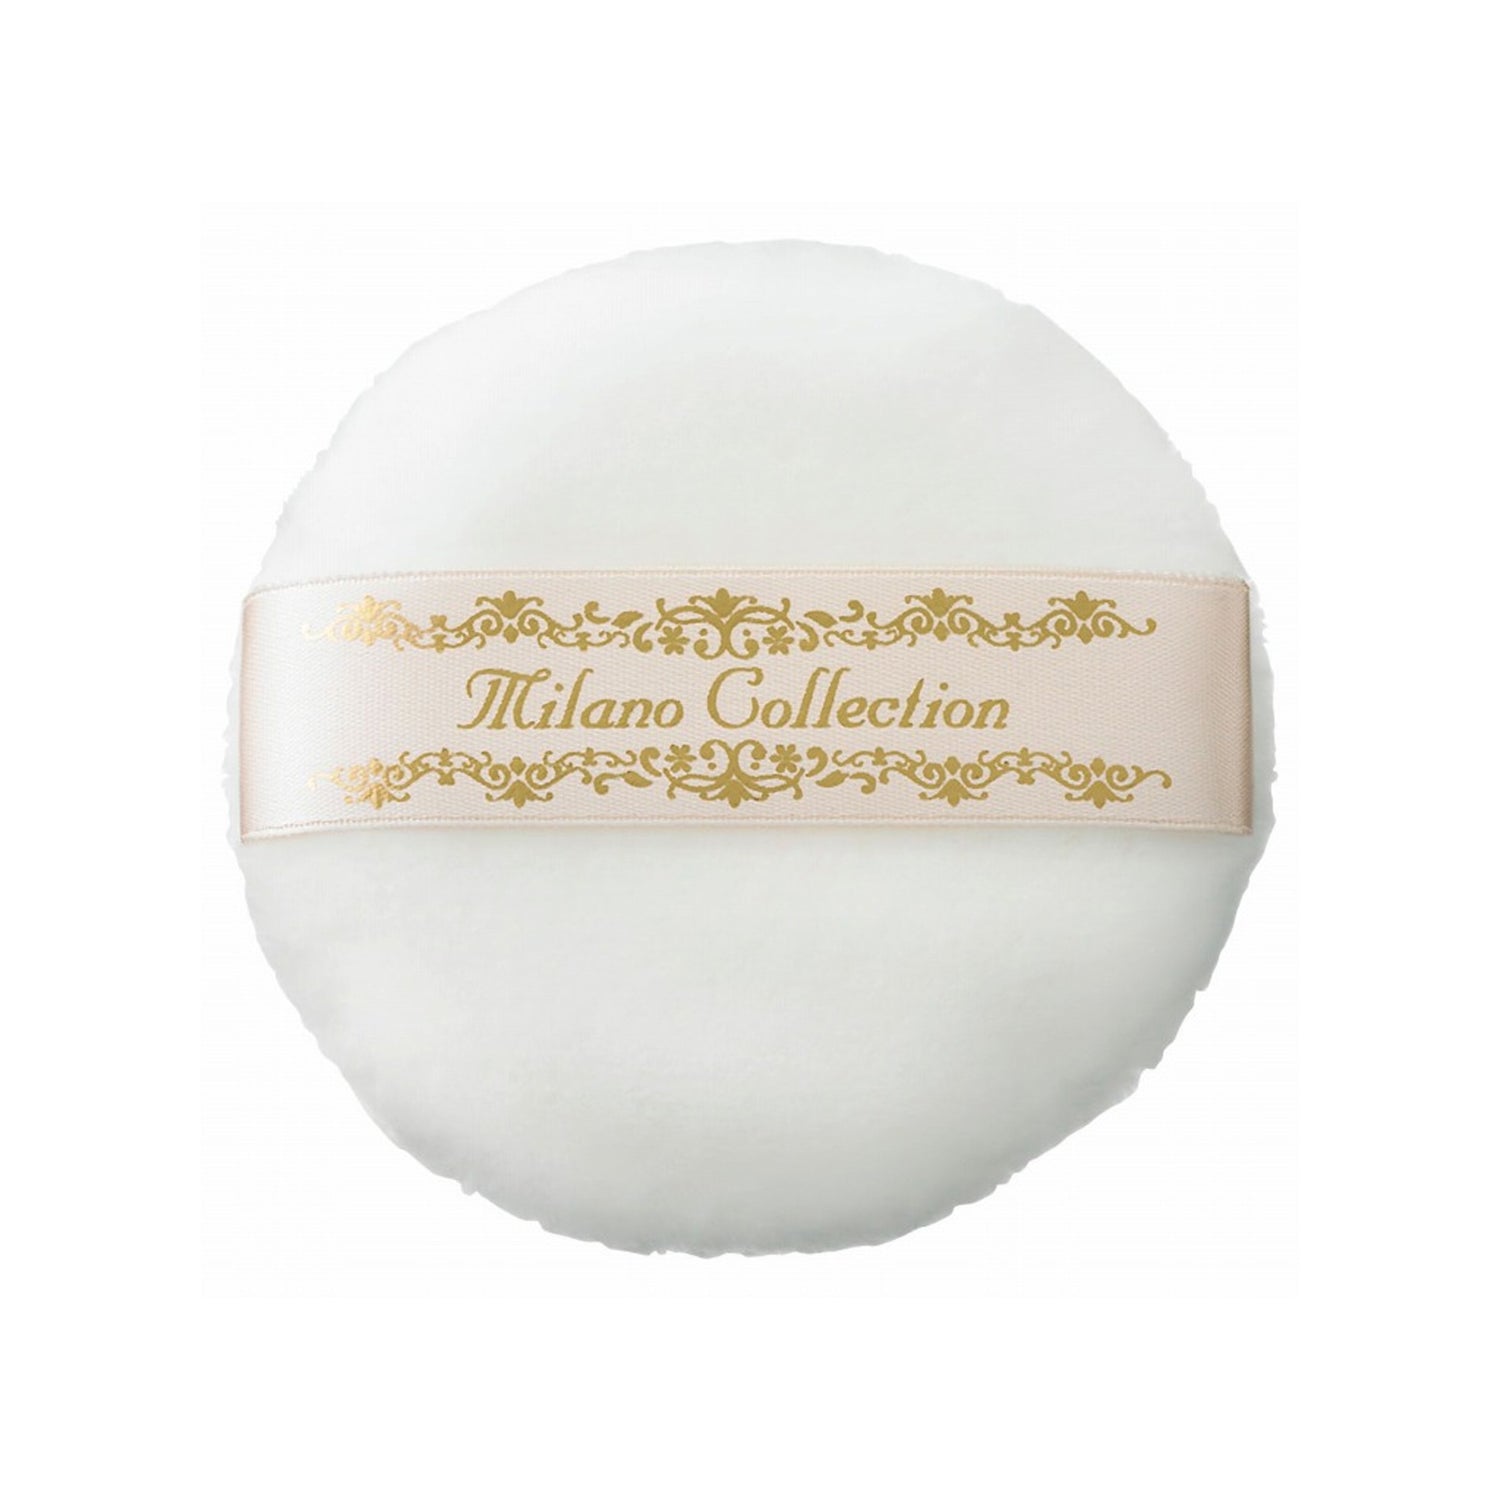 KANEBO Milano Collection GR Face Up Powder 2022 (30g)